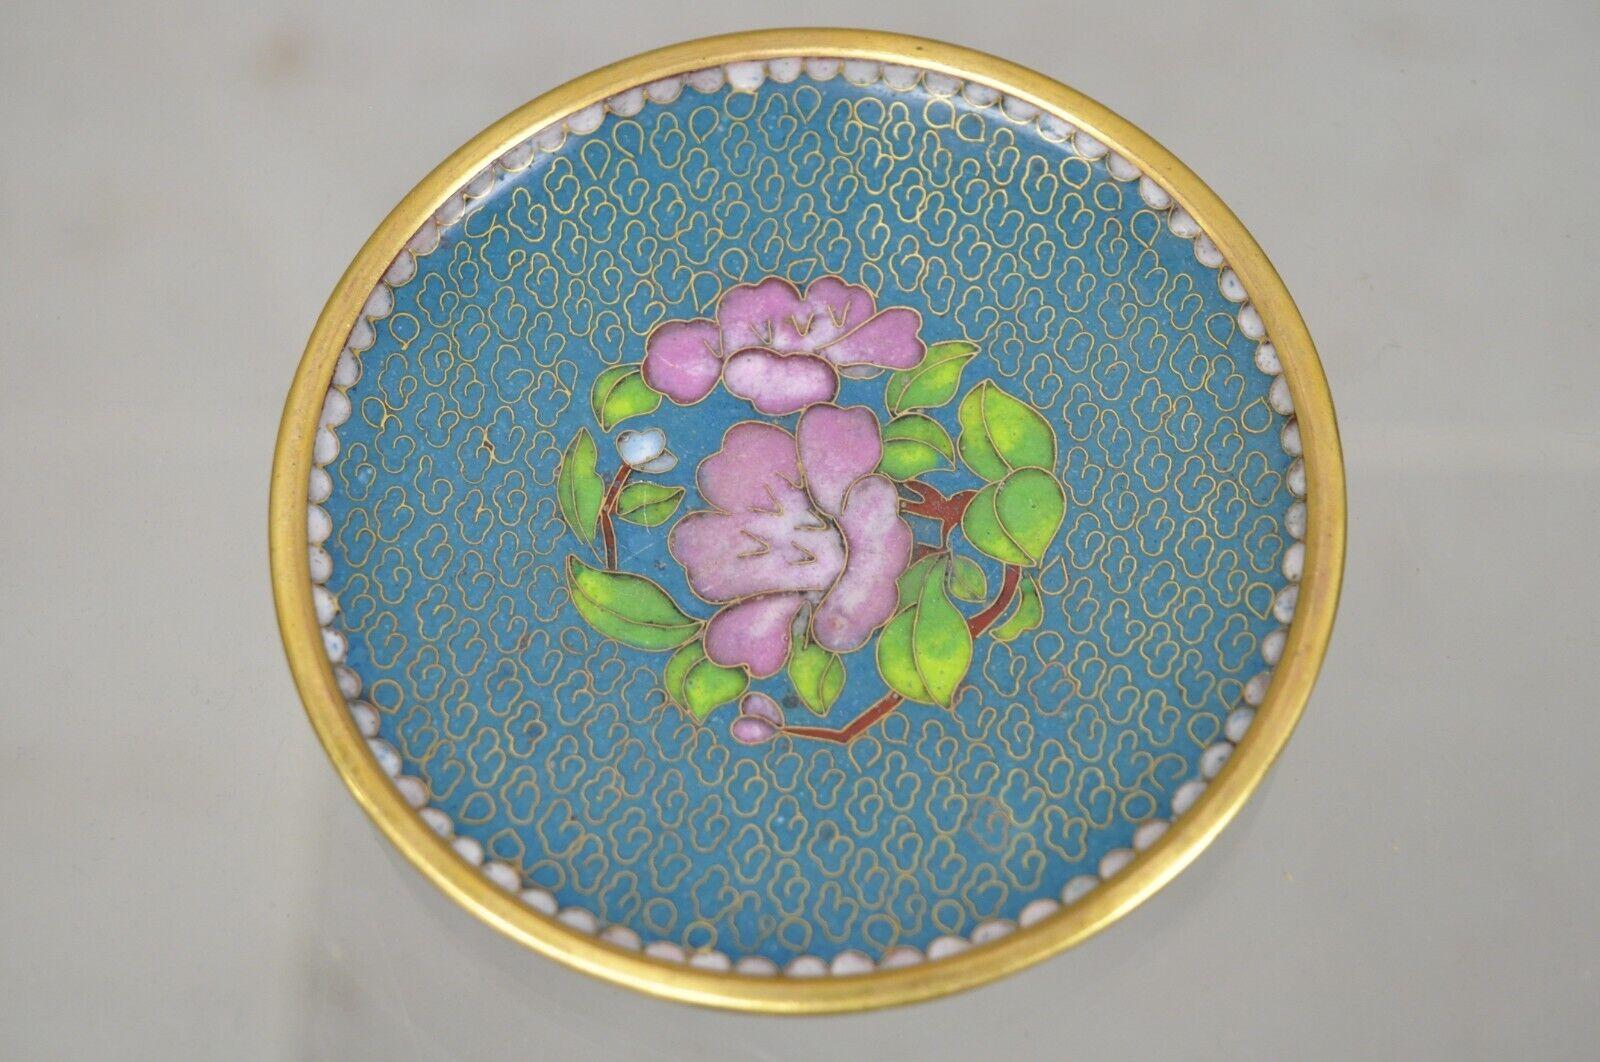 Vintage Brass Enamel Cloisonne Small Trinket Dish Set - Blue. Listing includes both dishes. Circa Late 20th Century.
Measurements: 0.25